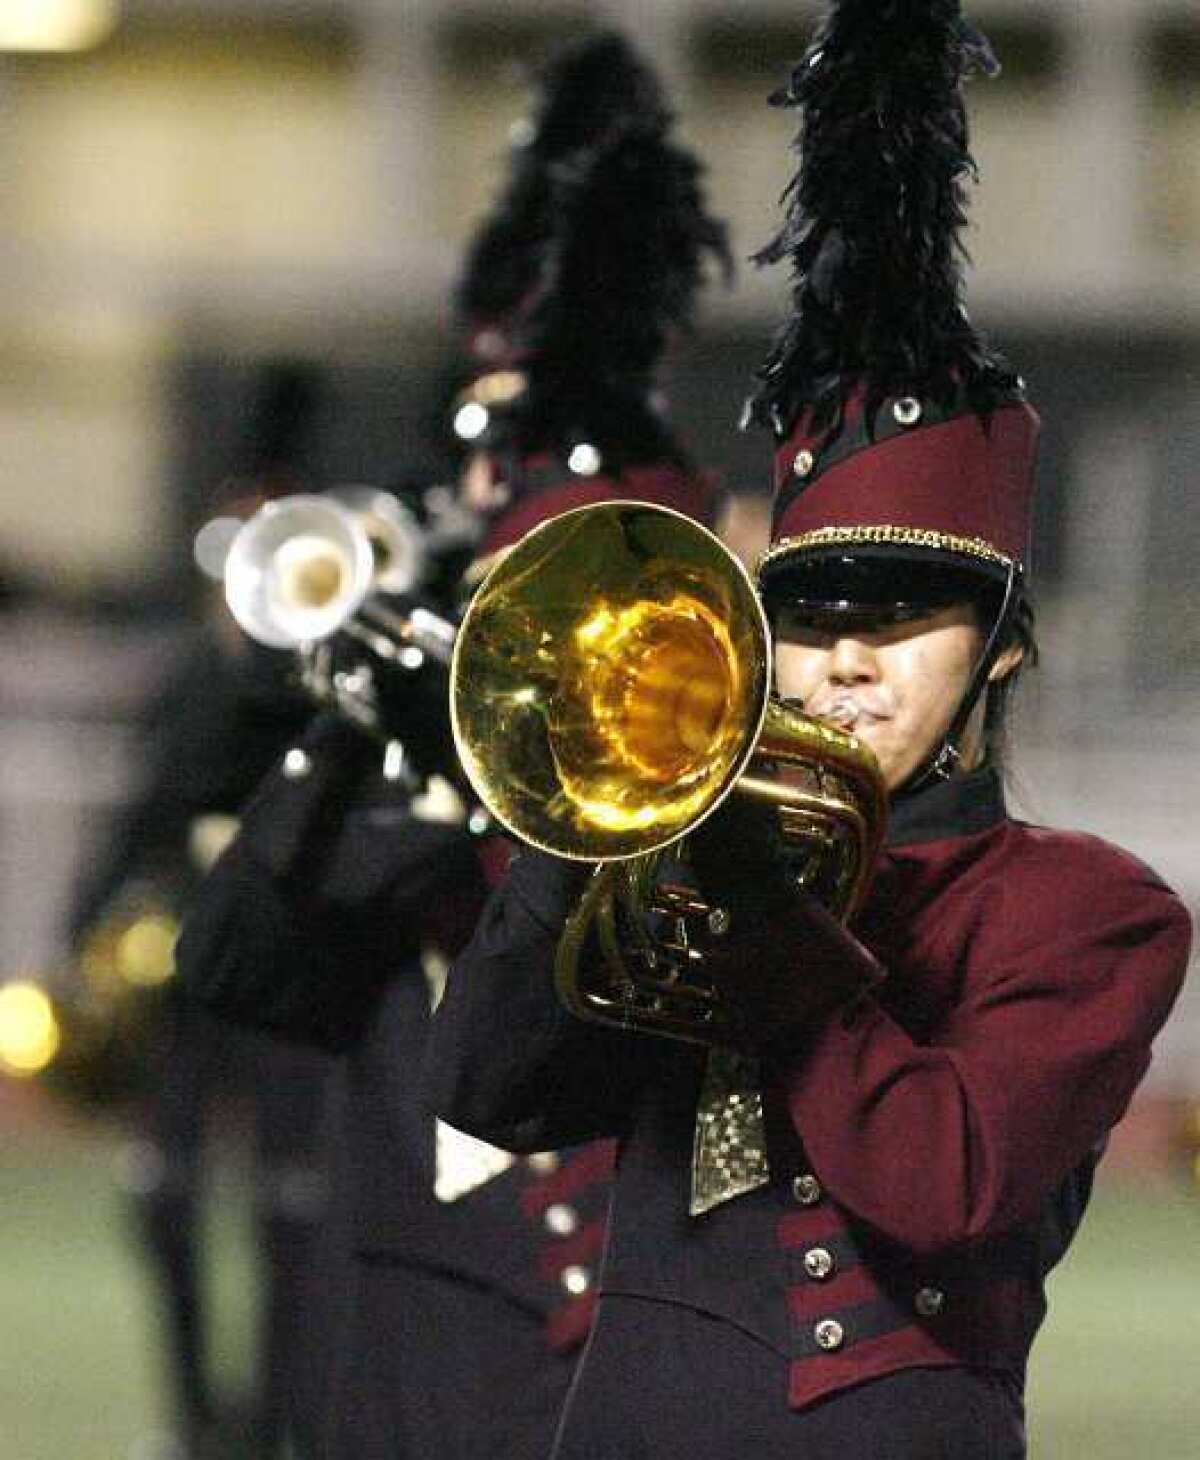 The La Canada High School marching band performs a song from their show entitled "Mechanize" for parents at the high school on Friday. After the brief performance at the school, the band traveled to Clovis to compete in the WBA Championships for the weekend.